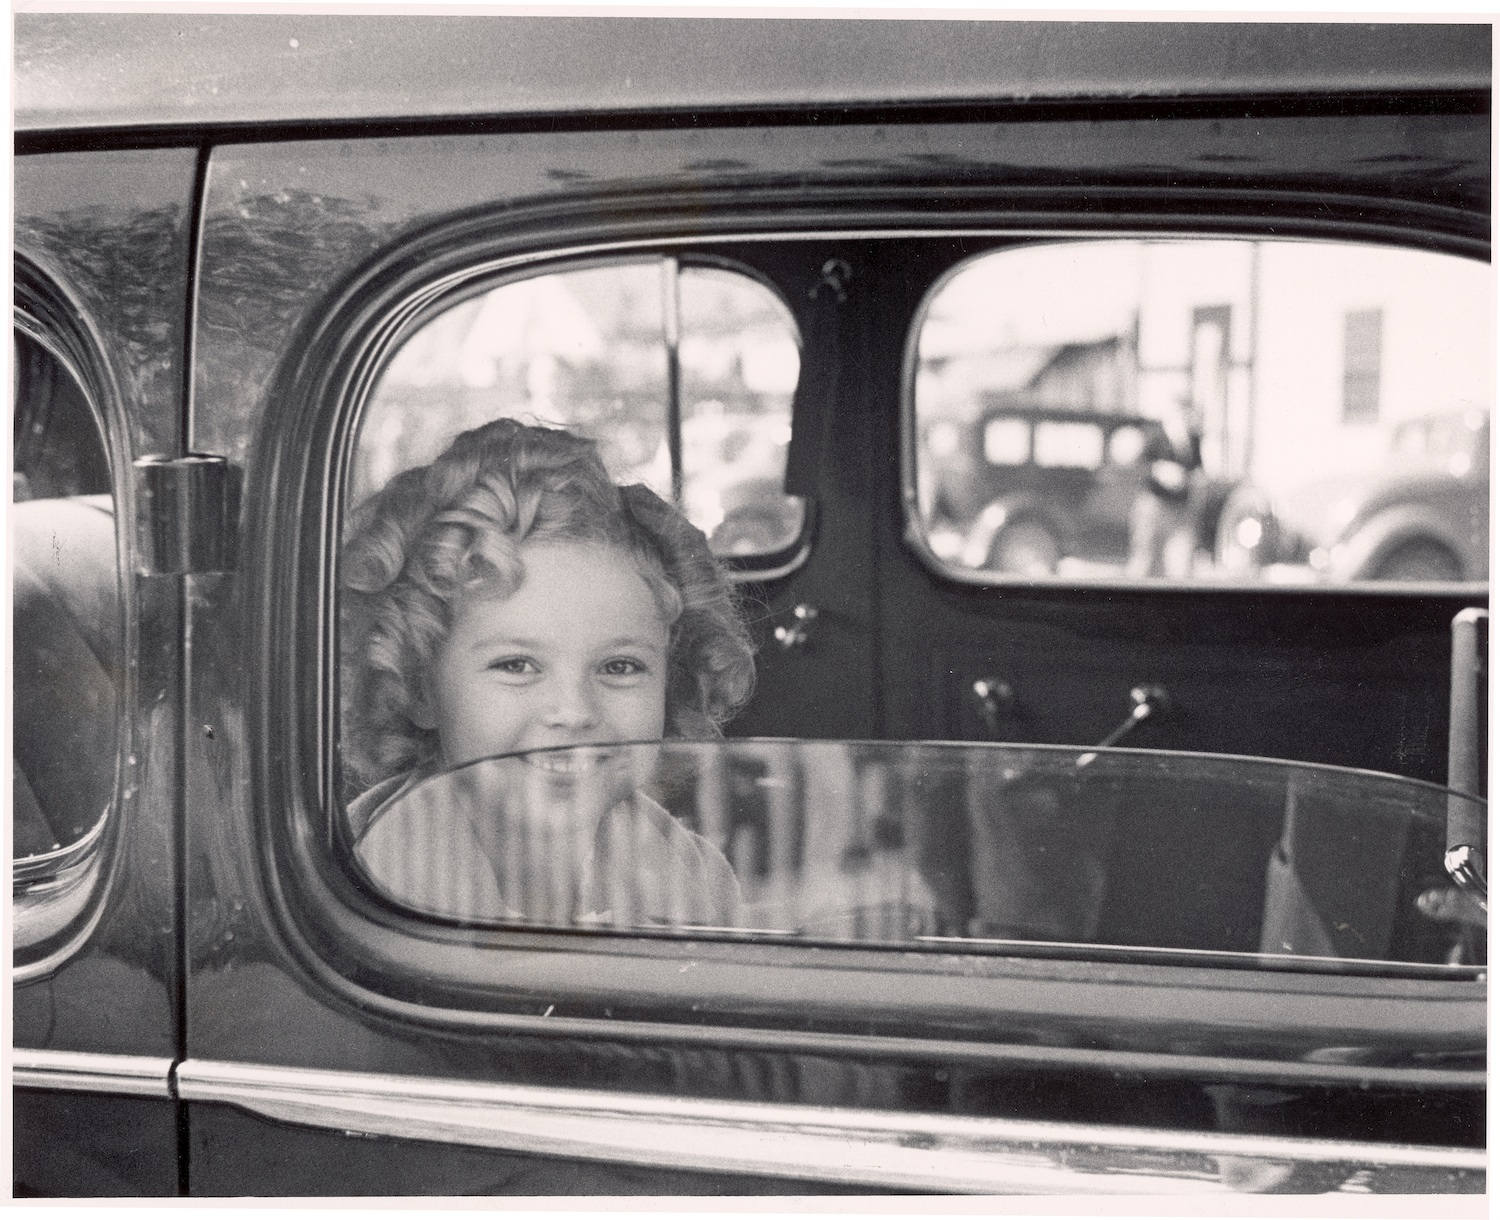 Child actress Shirley Temple arriving at 20th Century Fox film studio lot to celebrate her eighth birthday.